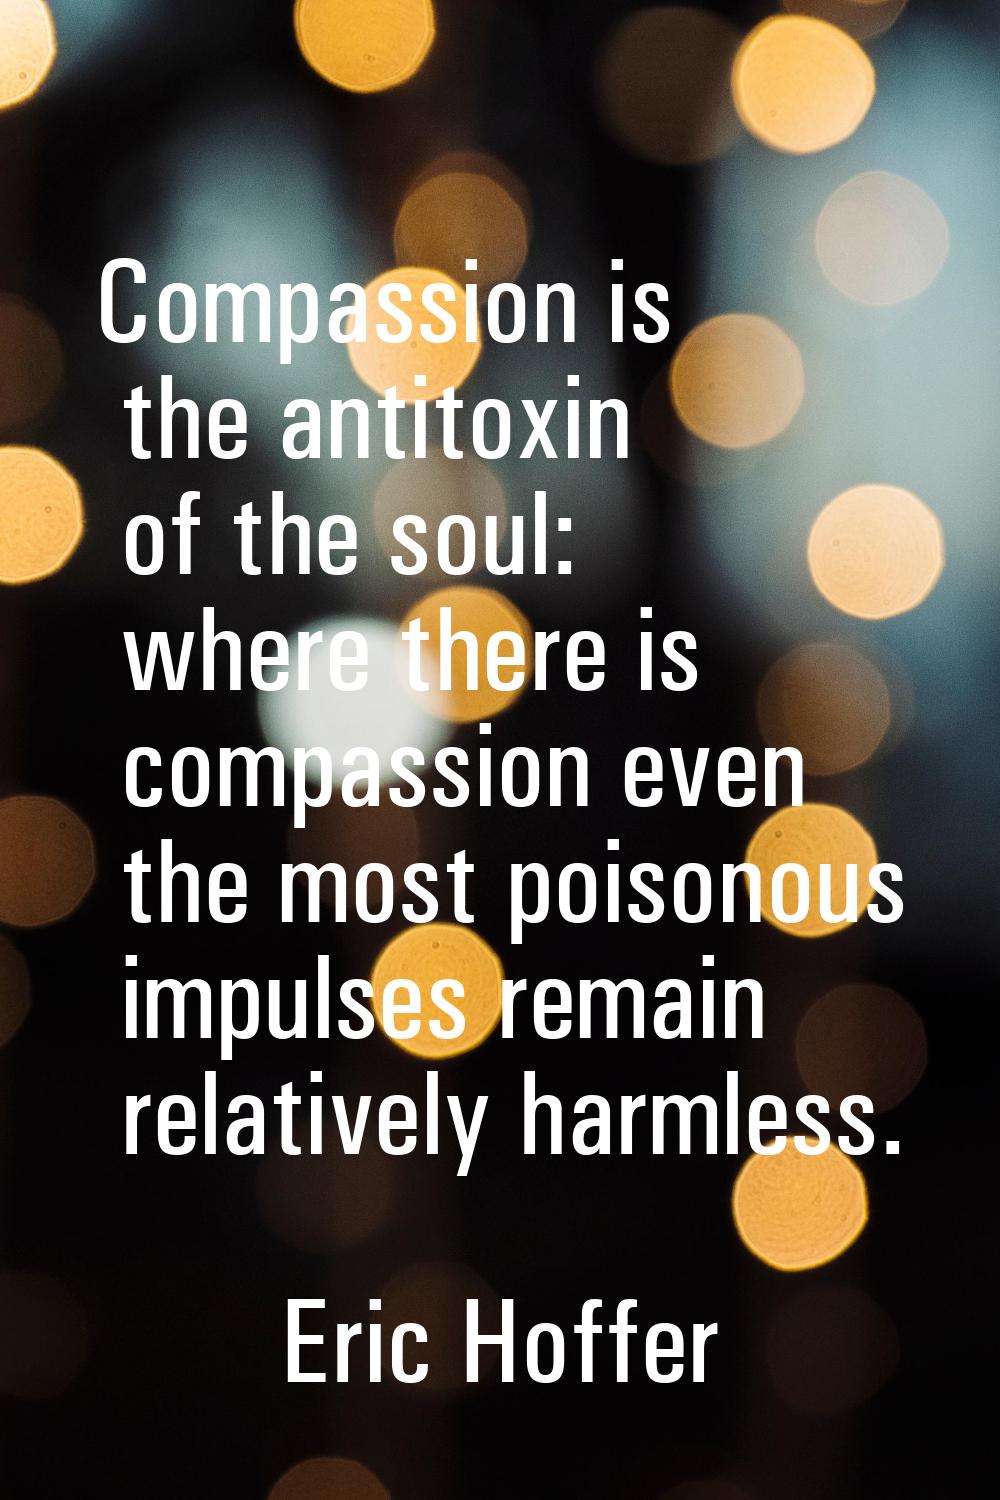 Compassion is the antitoxin of the soul: where there is compassion even the most poisonous impulses